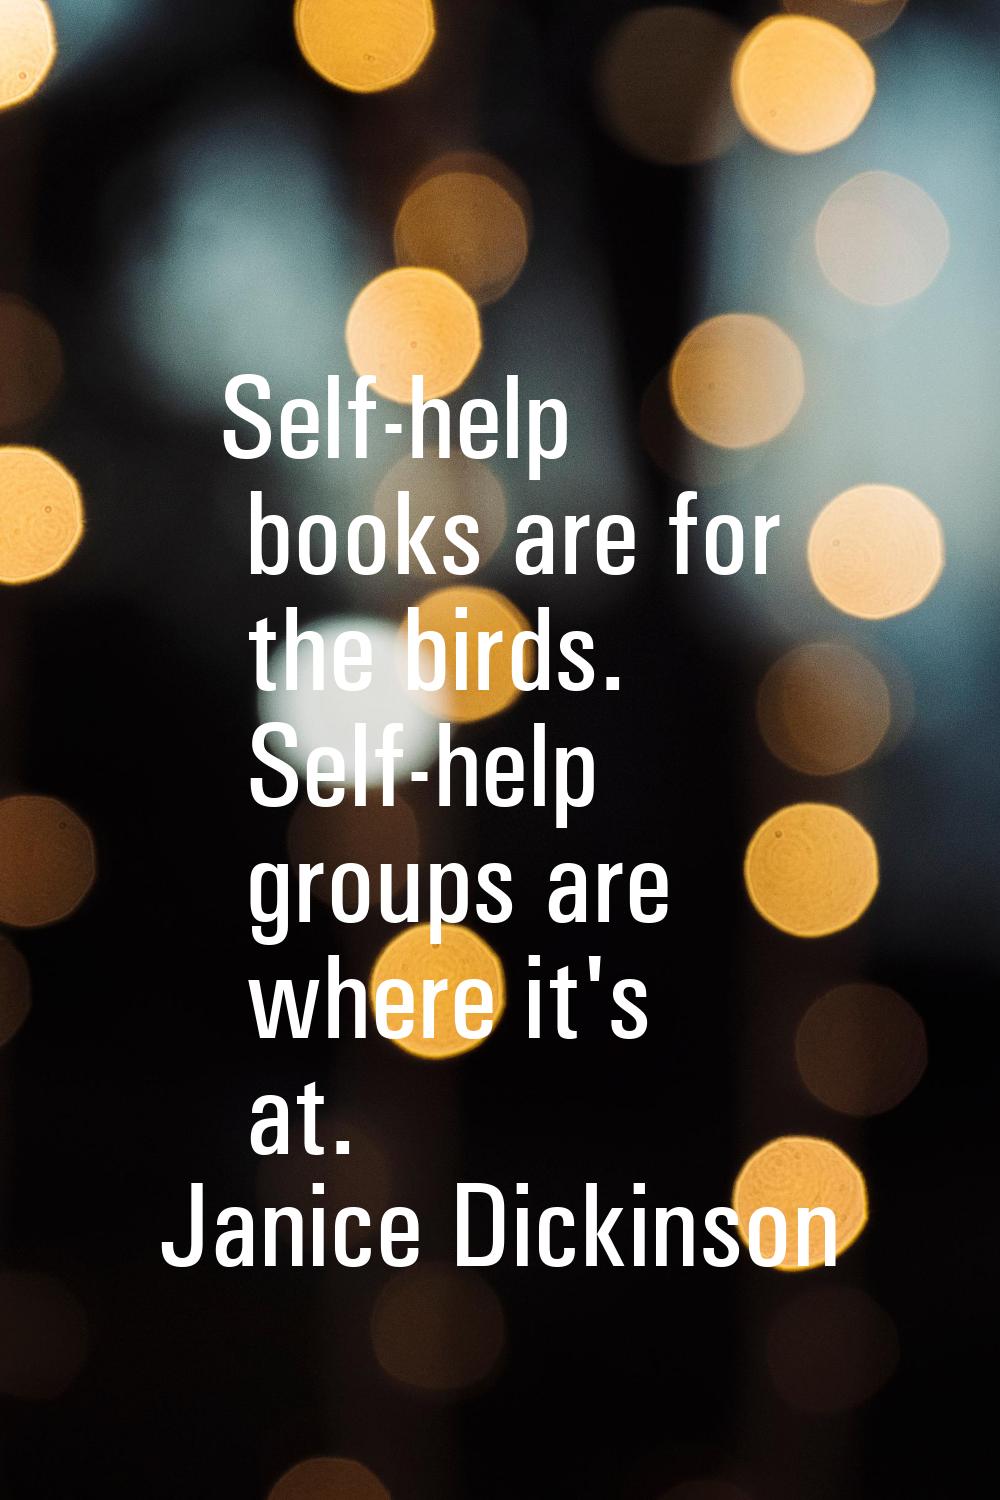 Self-help books are for the birds. Self-help groups are where it's at.